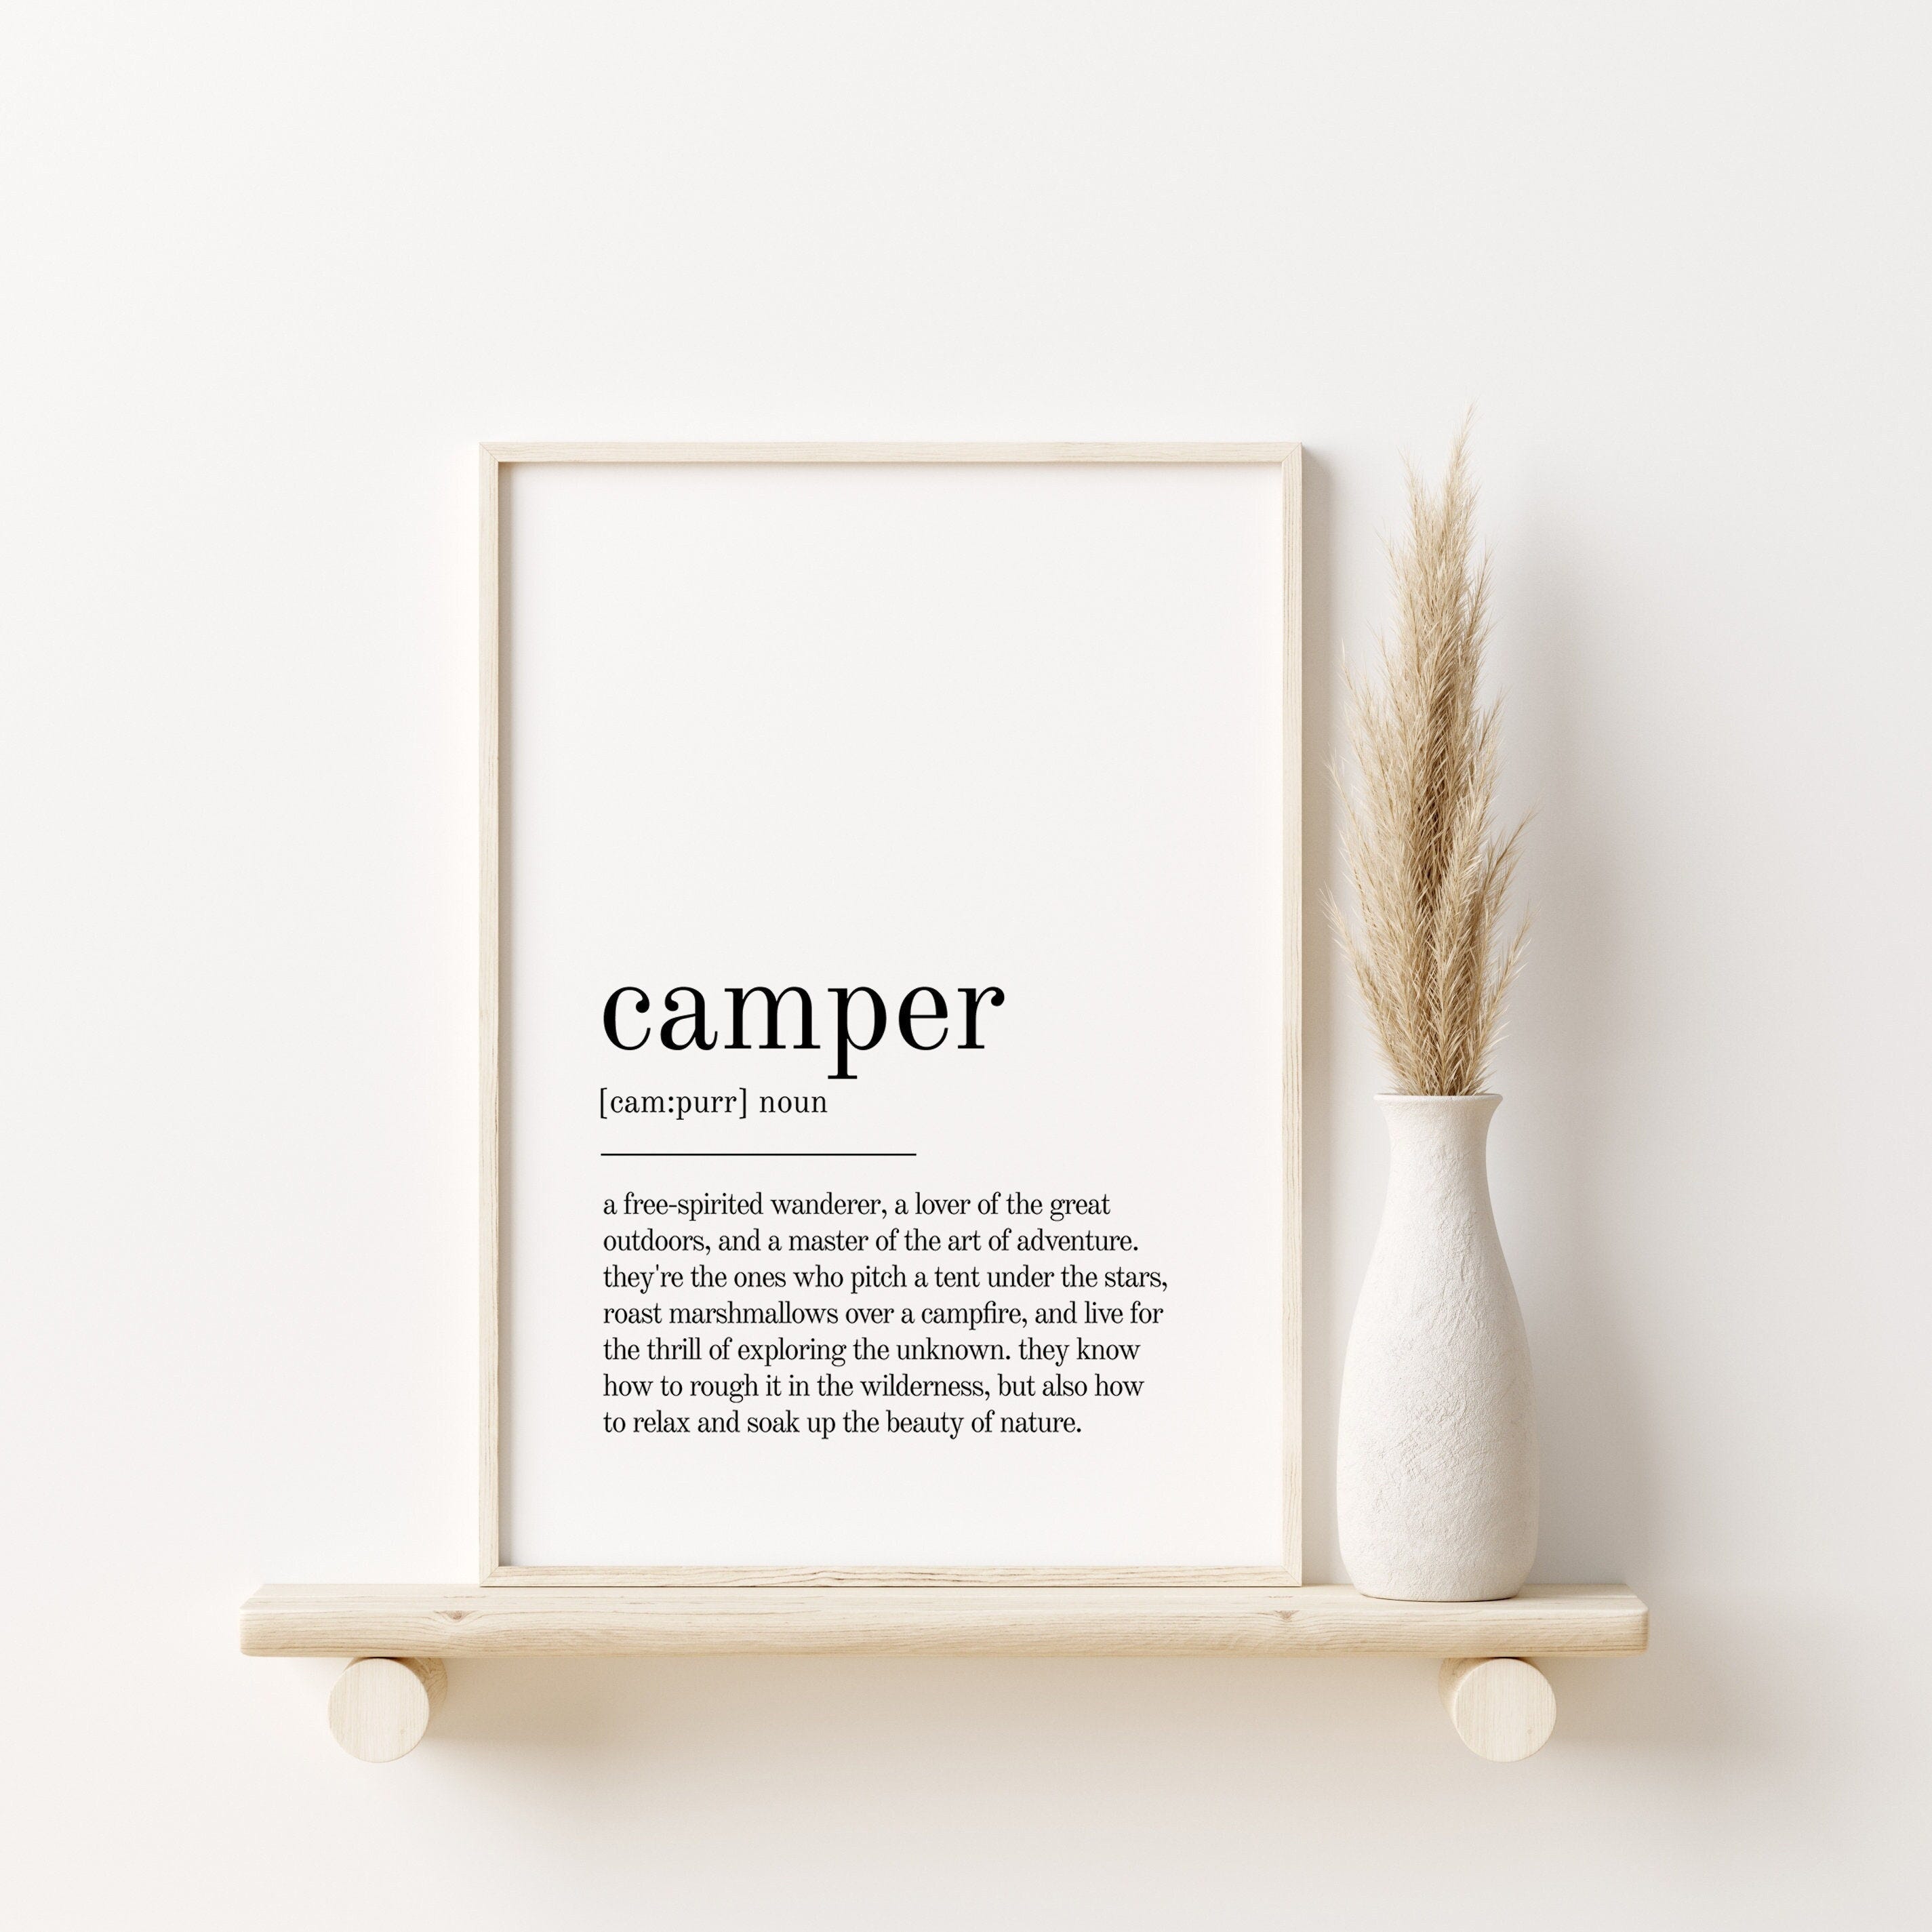 Camper Definition Print, book quote print, office definition print, Camper Wall Decor, gifts for her, dictionary art print, Print Definition